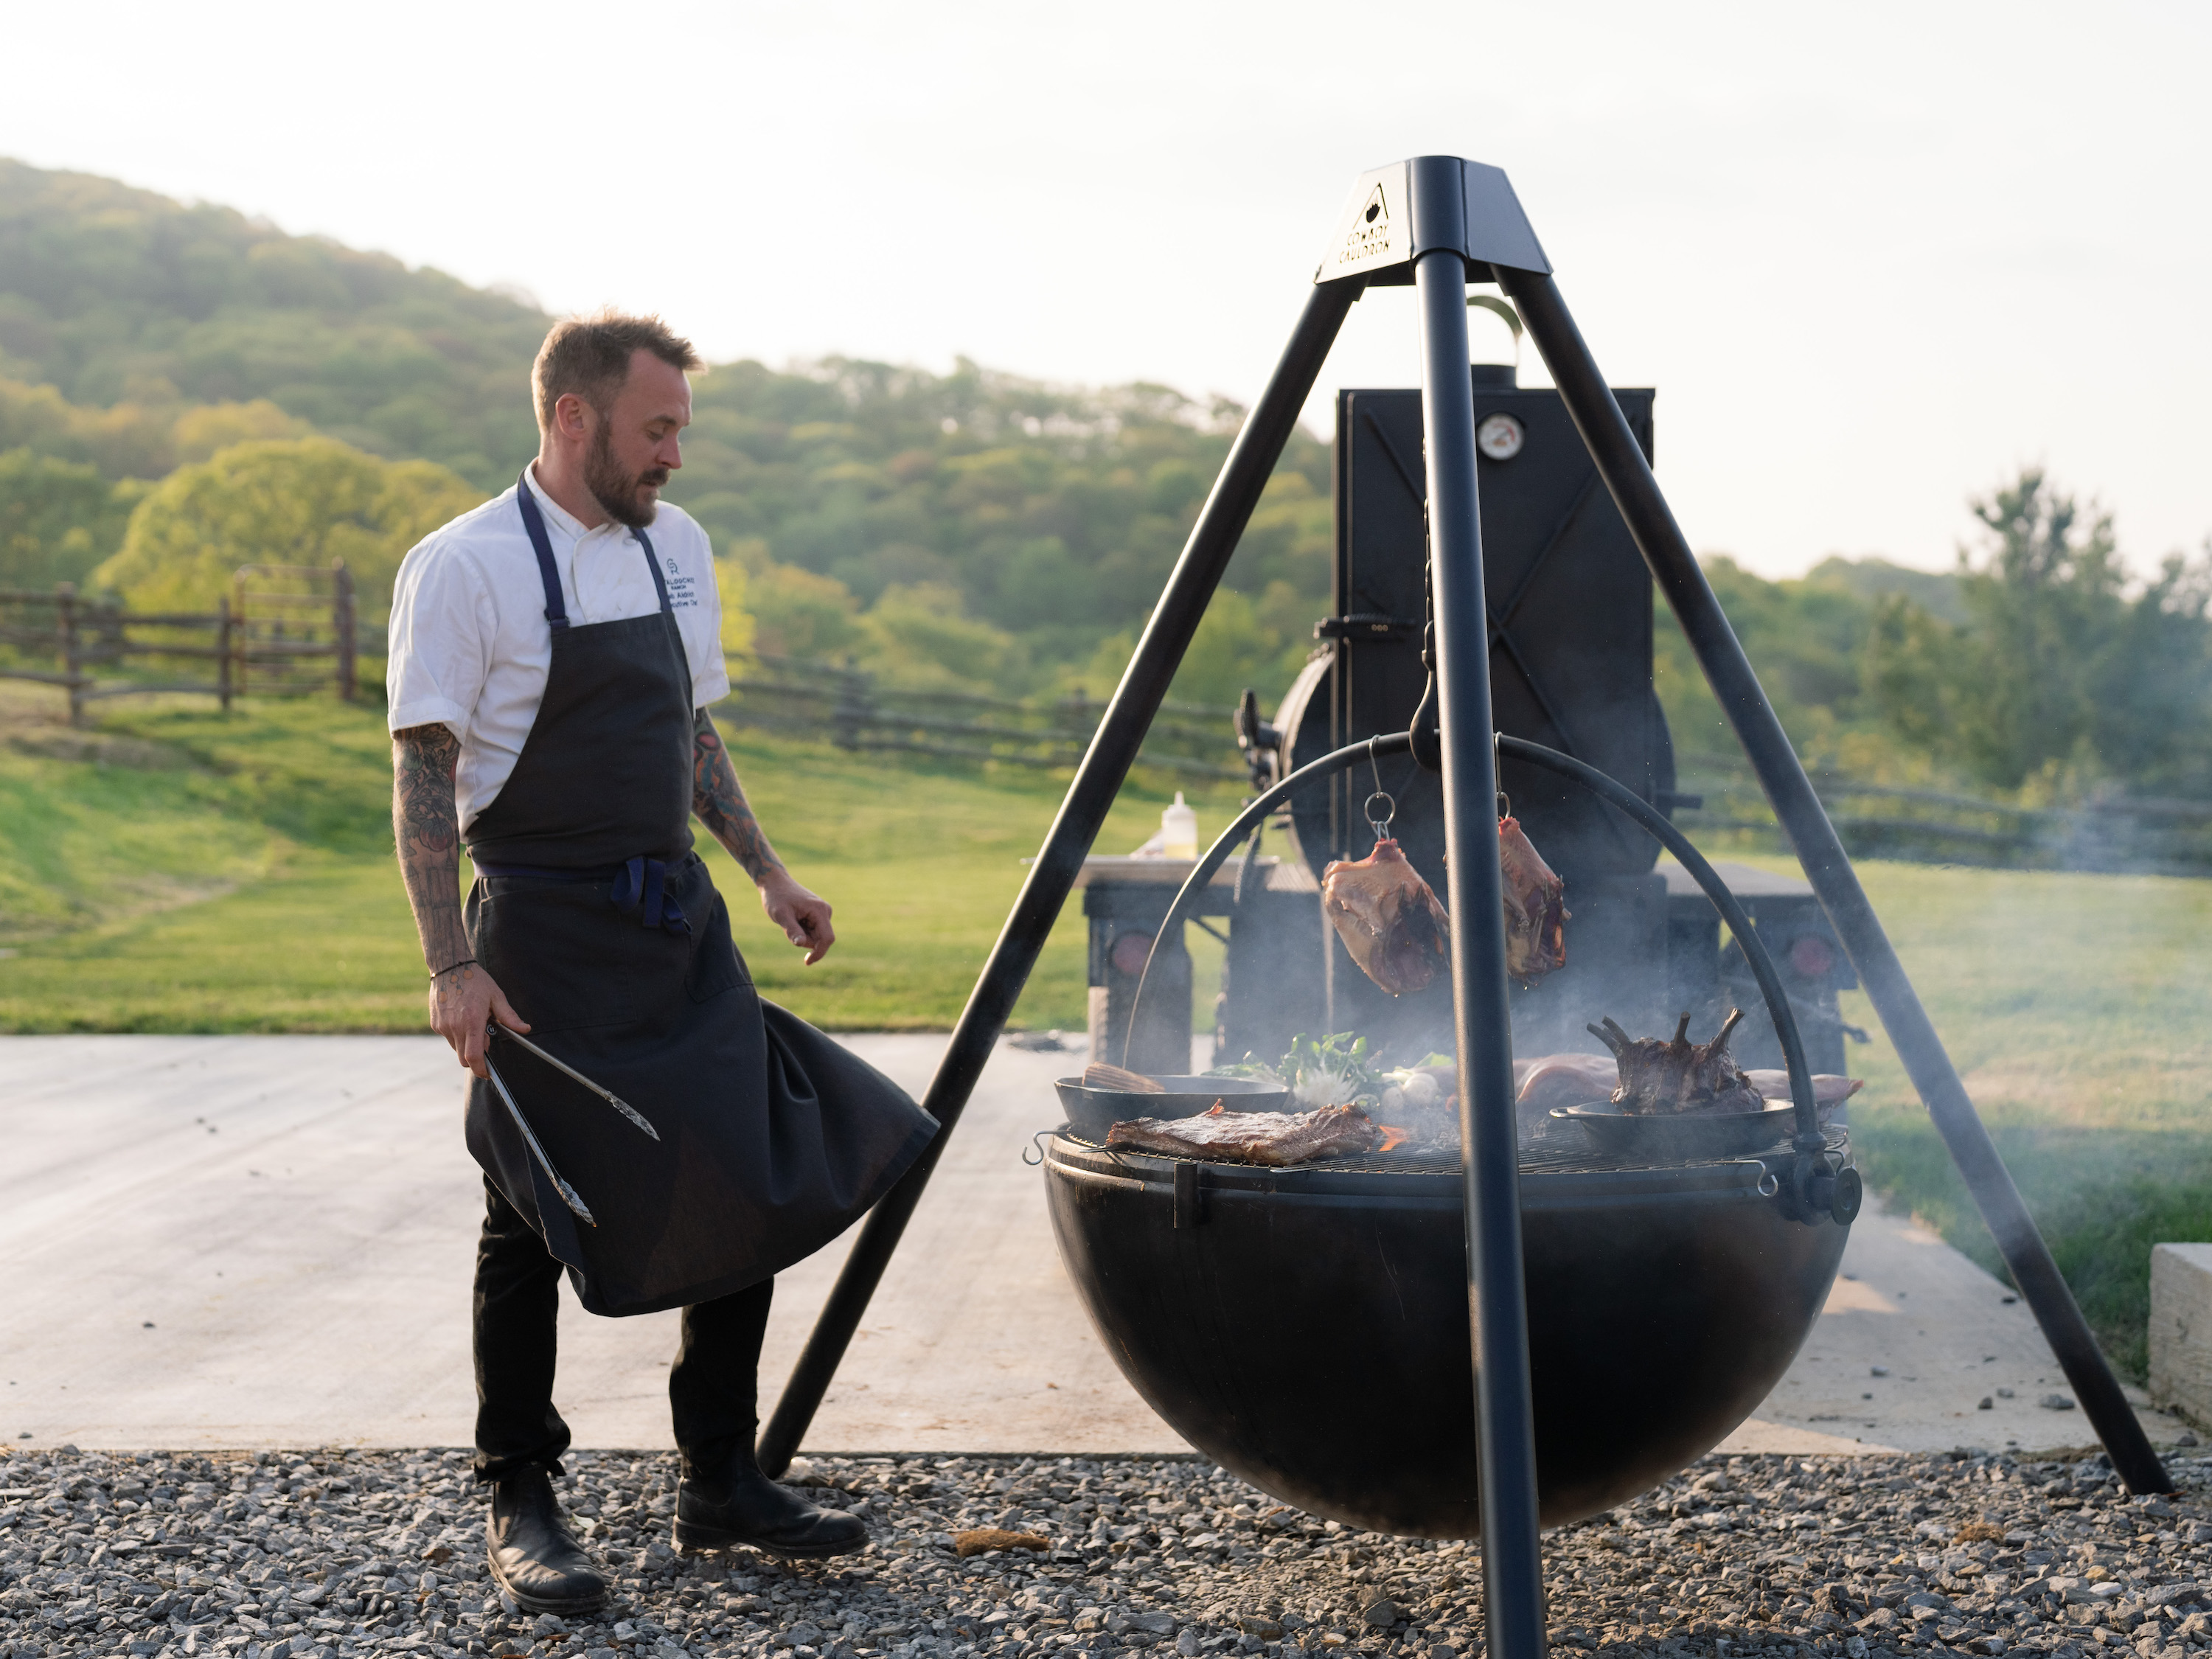 A chef stands by a large fire pit grill with food on it.